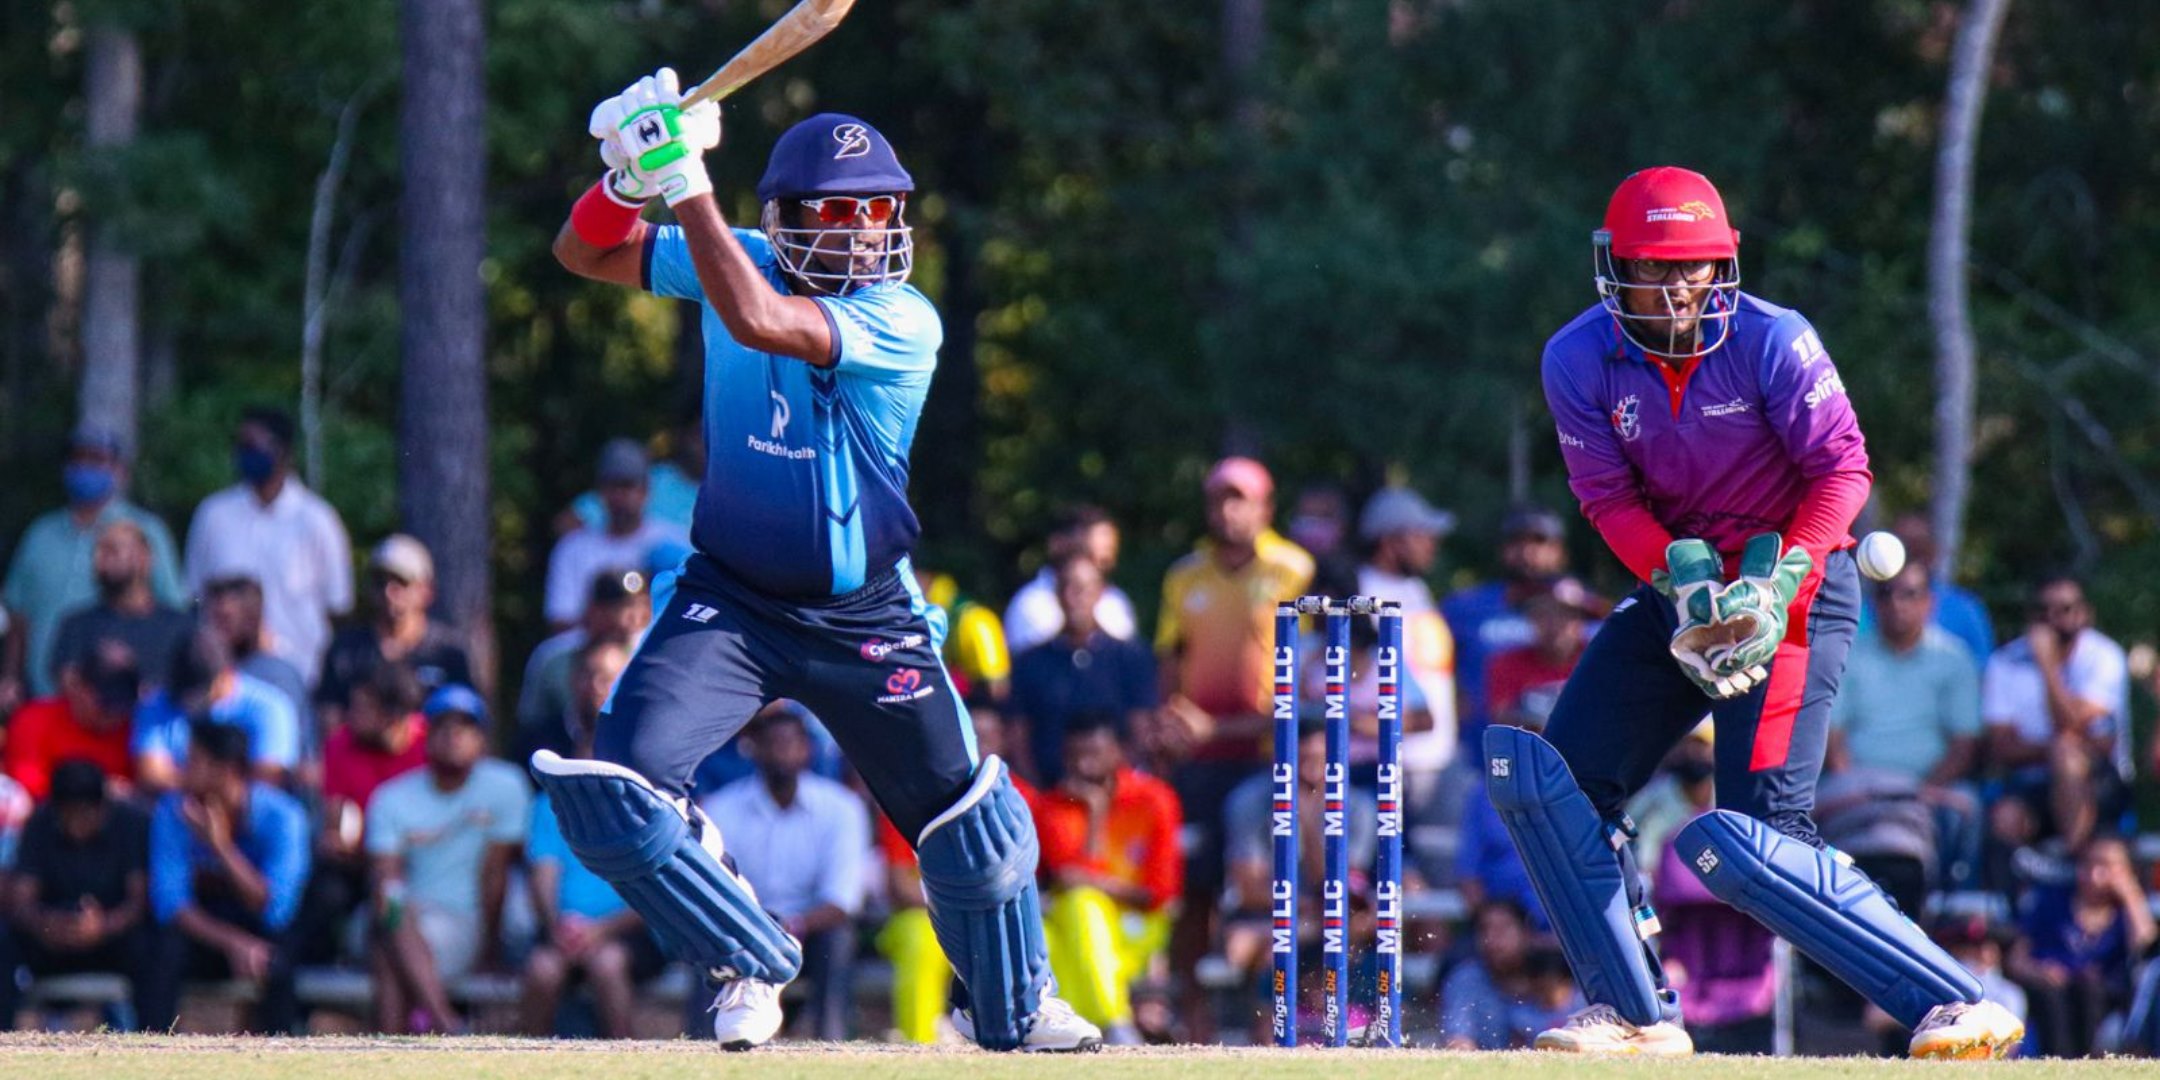 Minor League Cricket 2022 Season Opening and Championship Dates Released